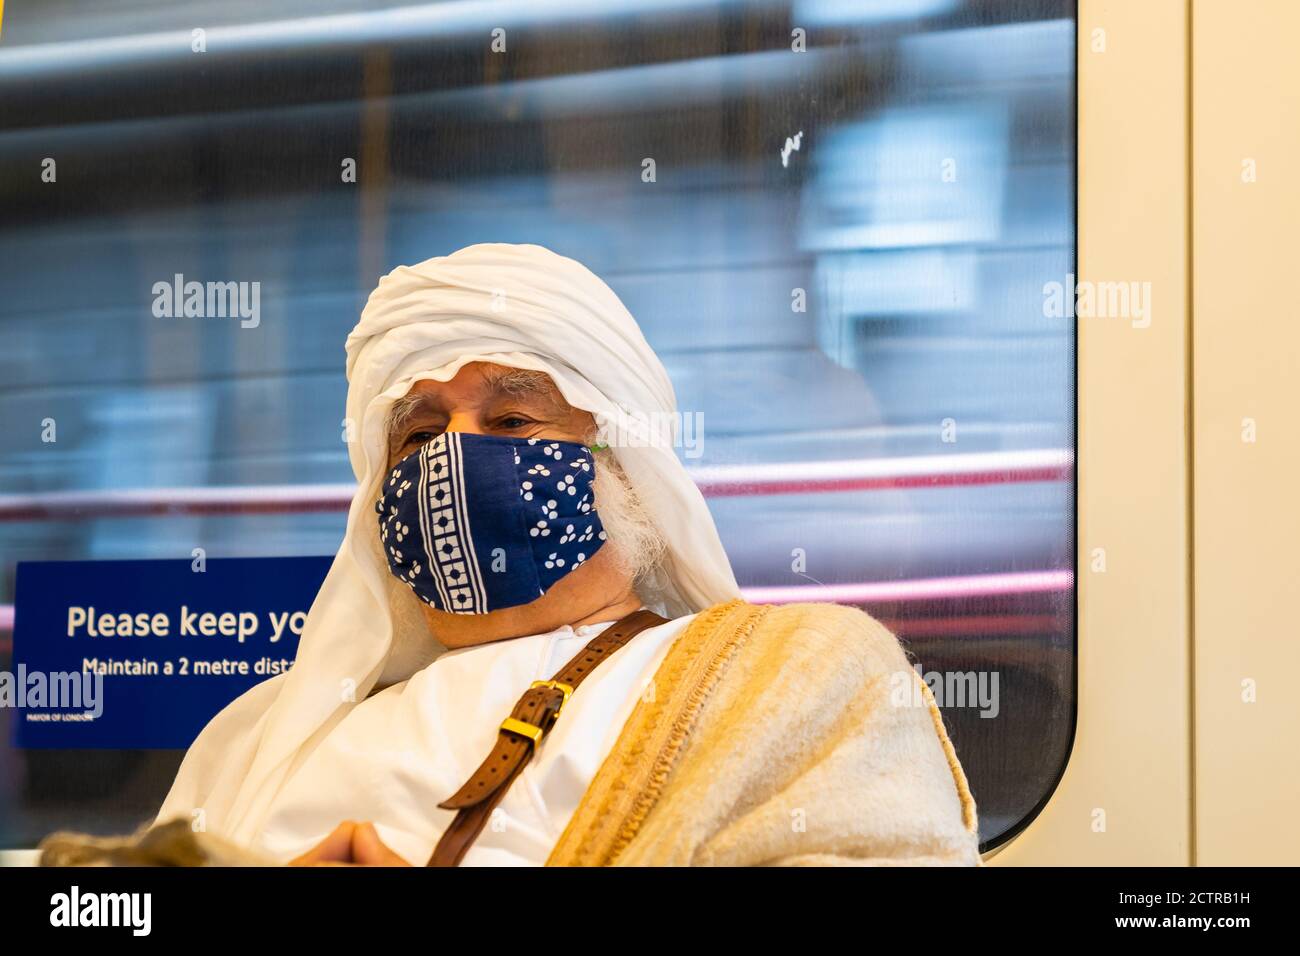 LONDON, ENGLAND - JULY 6, 2020: Elderly white haired man wearing an Arabic Keffiyeh headscarf and a face mask on the London Underground during the COV Stock Photo